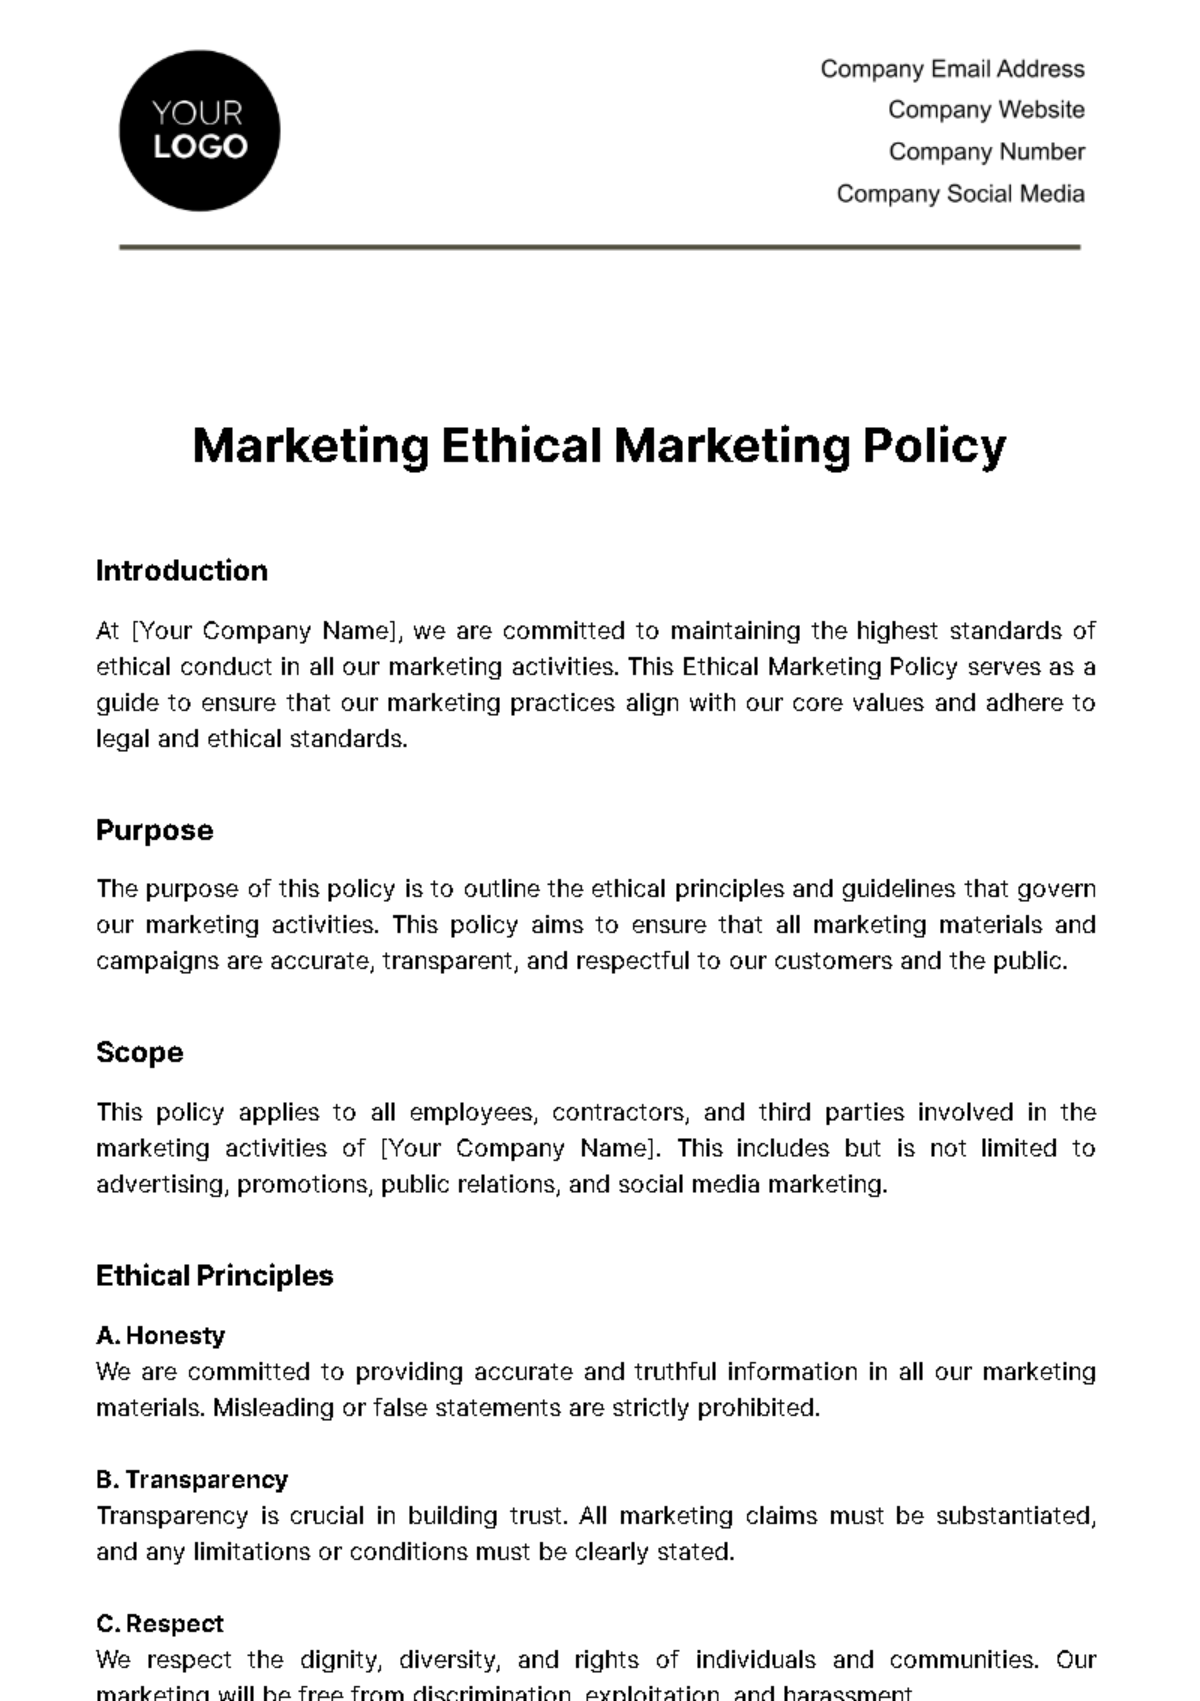 Marketing Ethical Marketing Policy Template